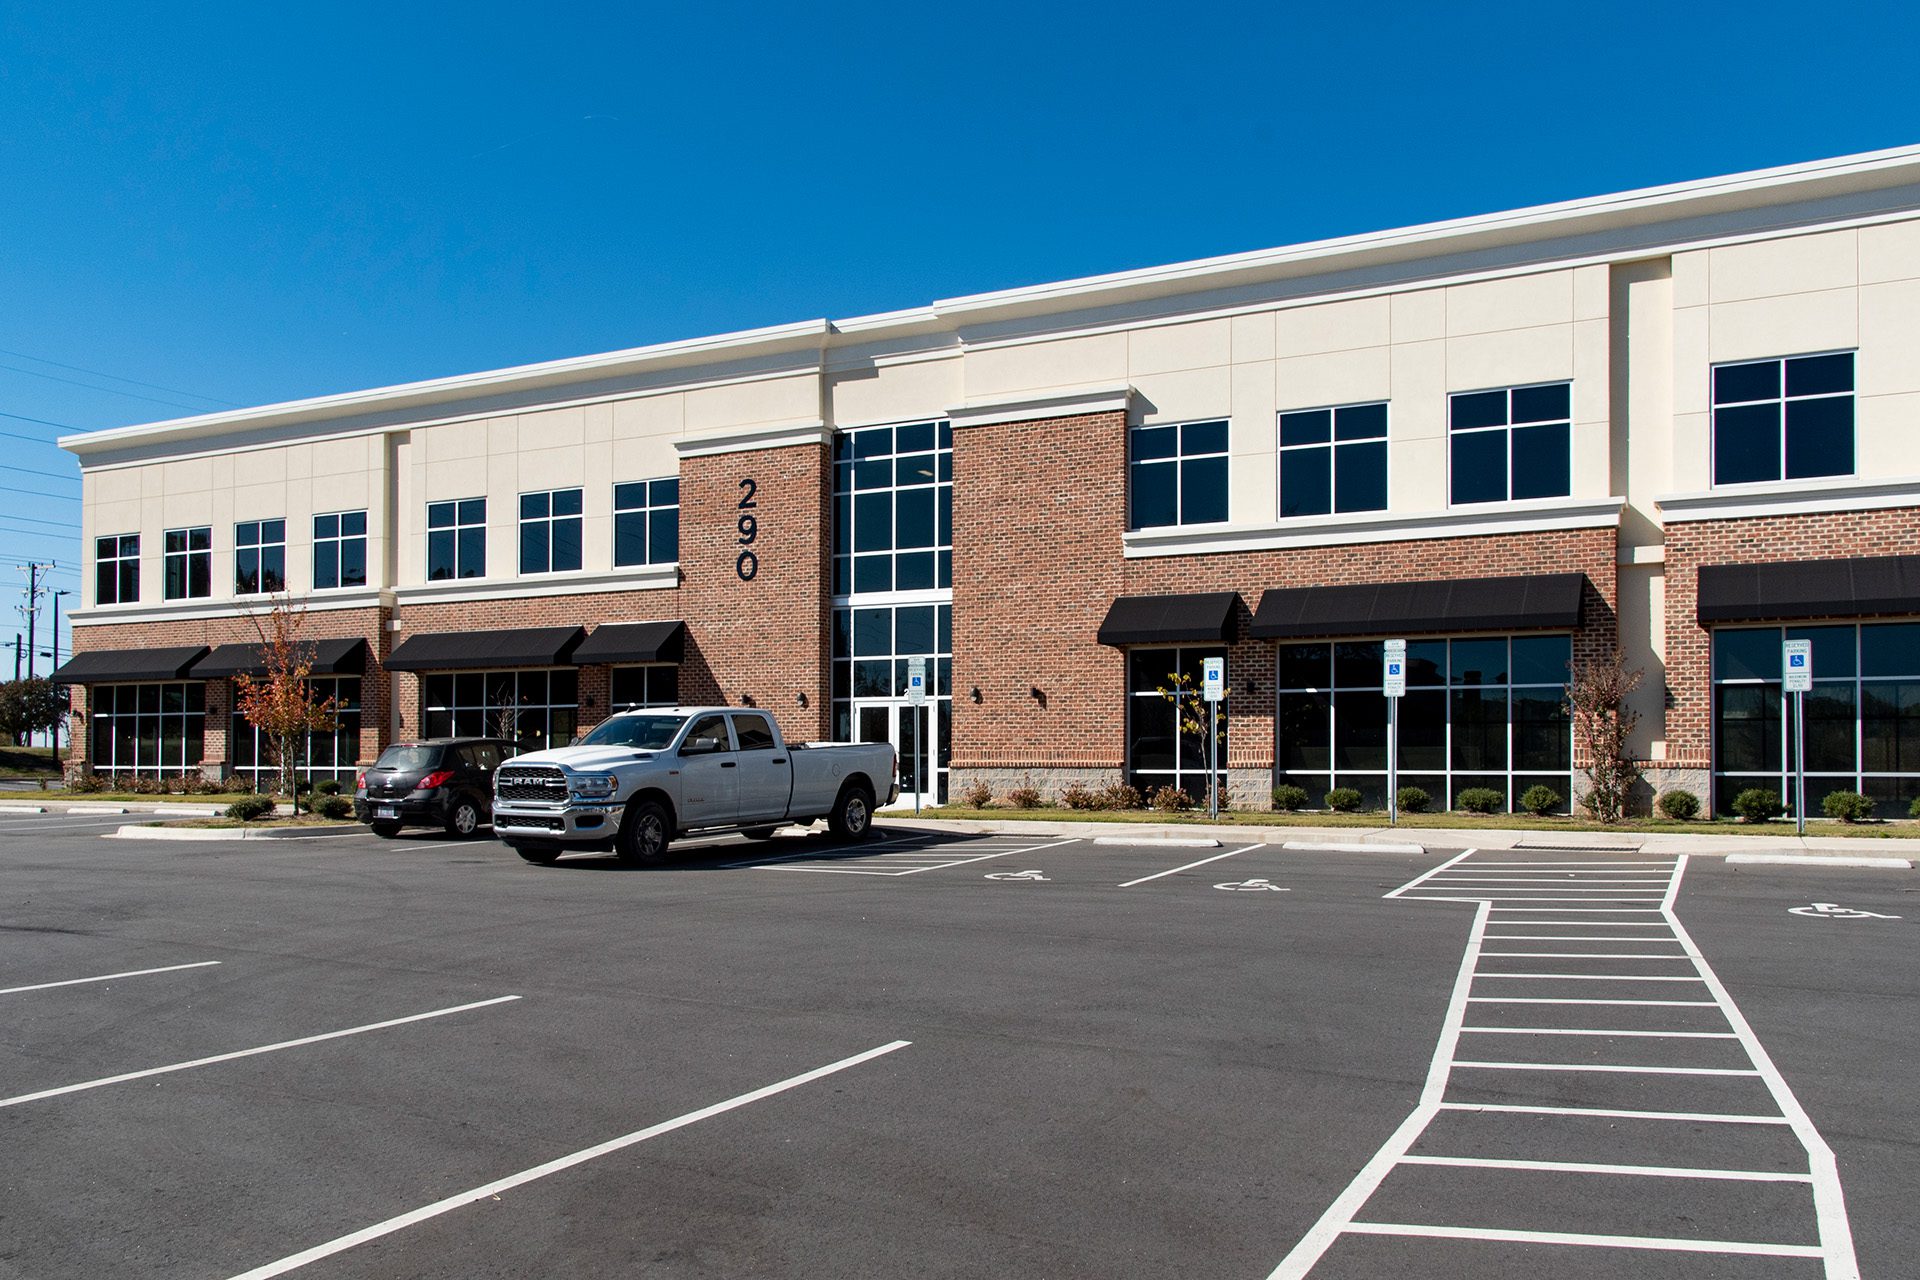 Exterior of a two story brick office building with paved parking lot